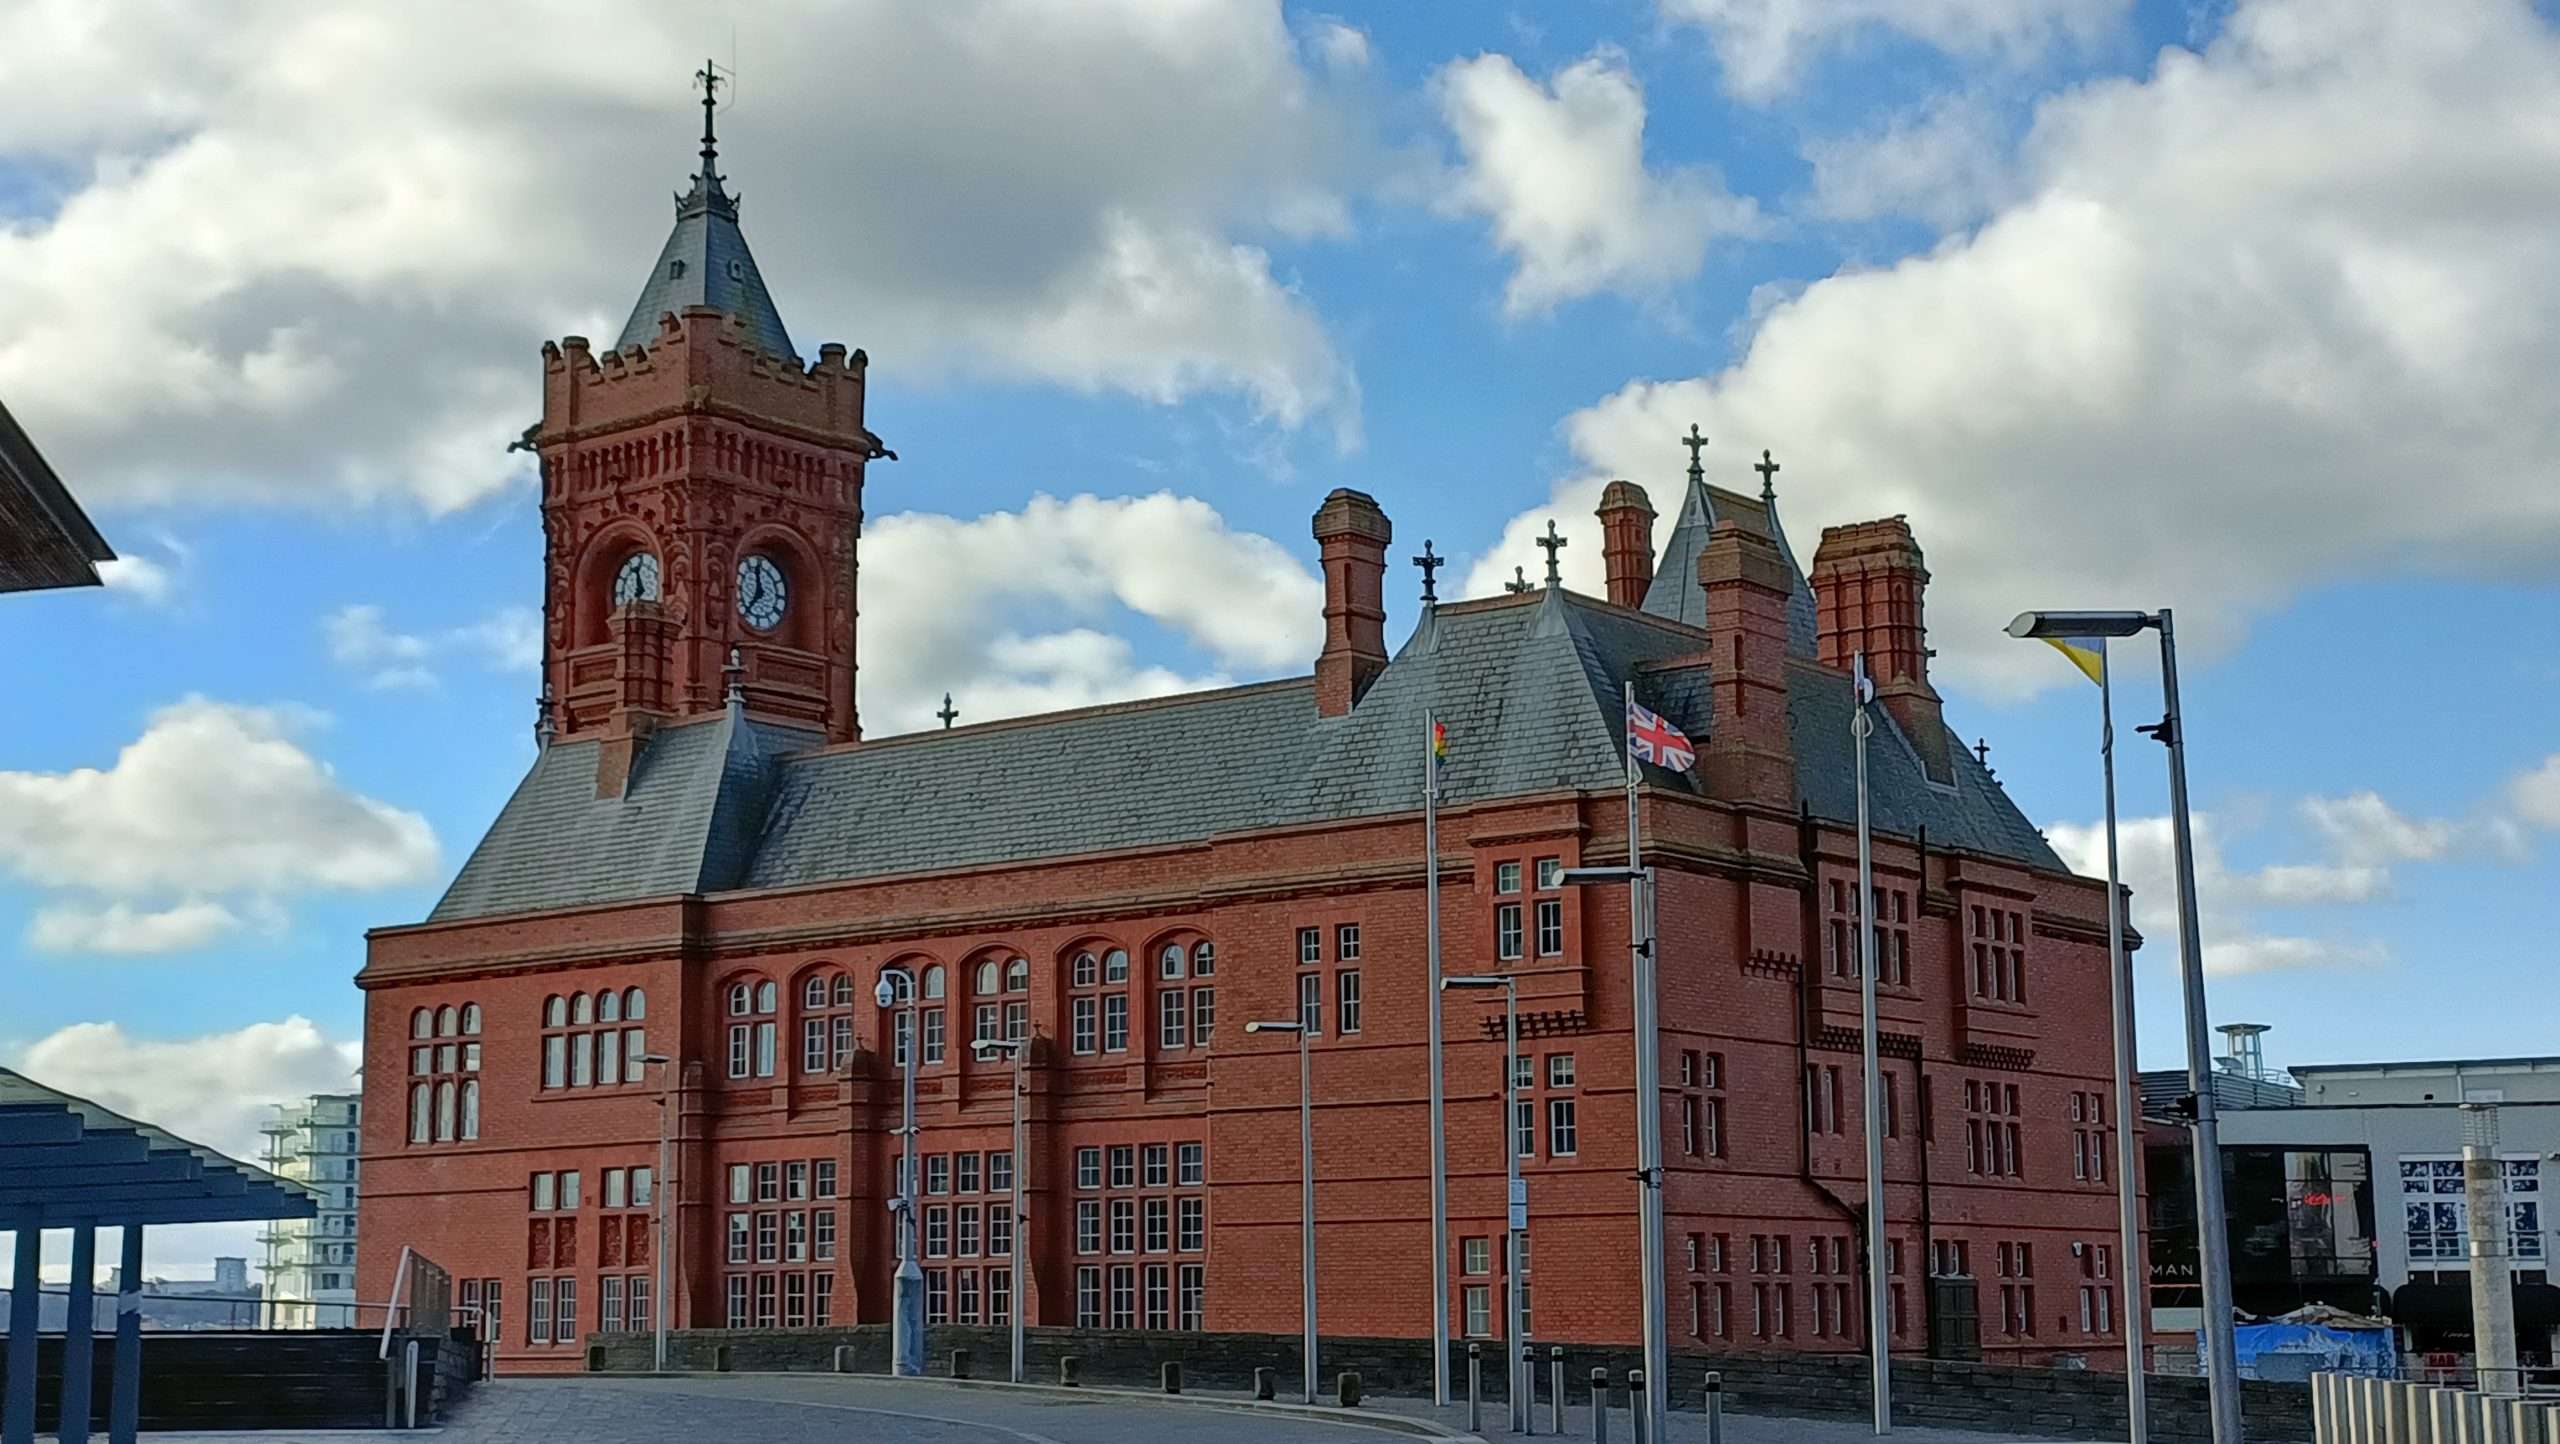 Protest in Cardiff Bay planned for Wednesday